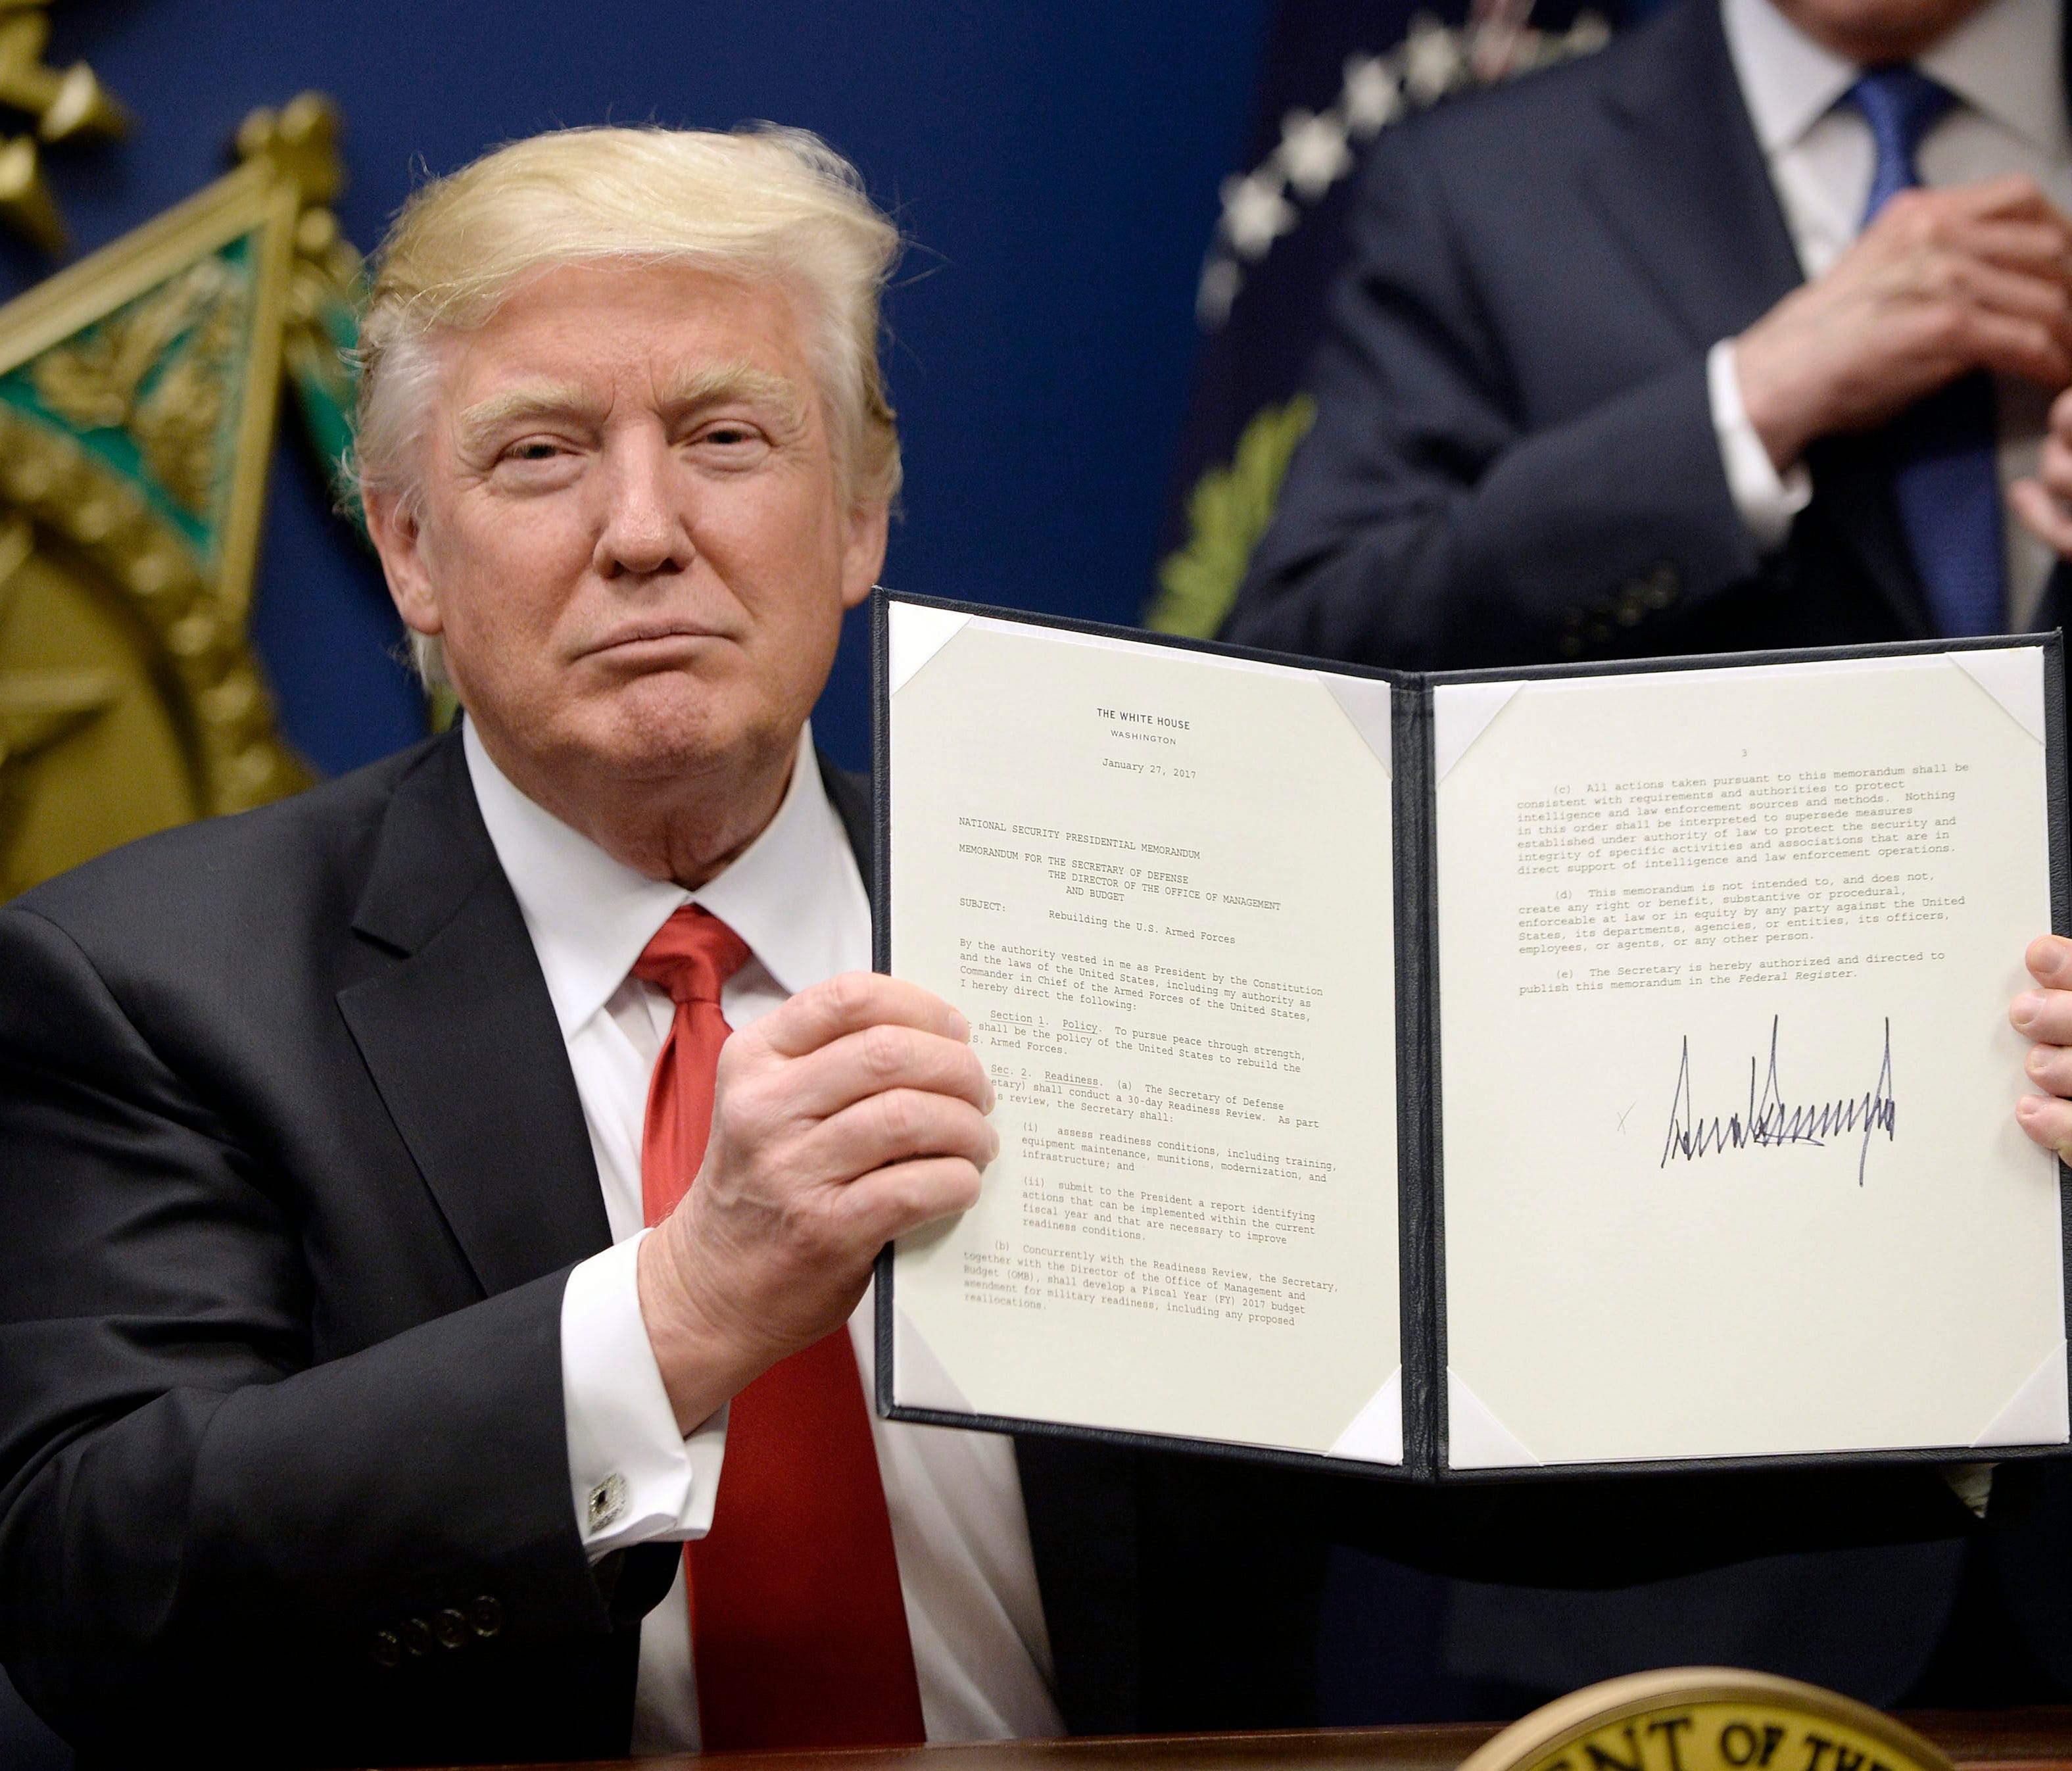 President Trump signs executive orders, including a temporary travel ban against people from seven majority-Muslim countries, at the Pentagon in Arlington, Va., on Jan. 27, 2017.